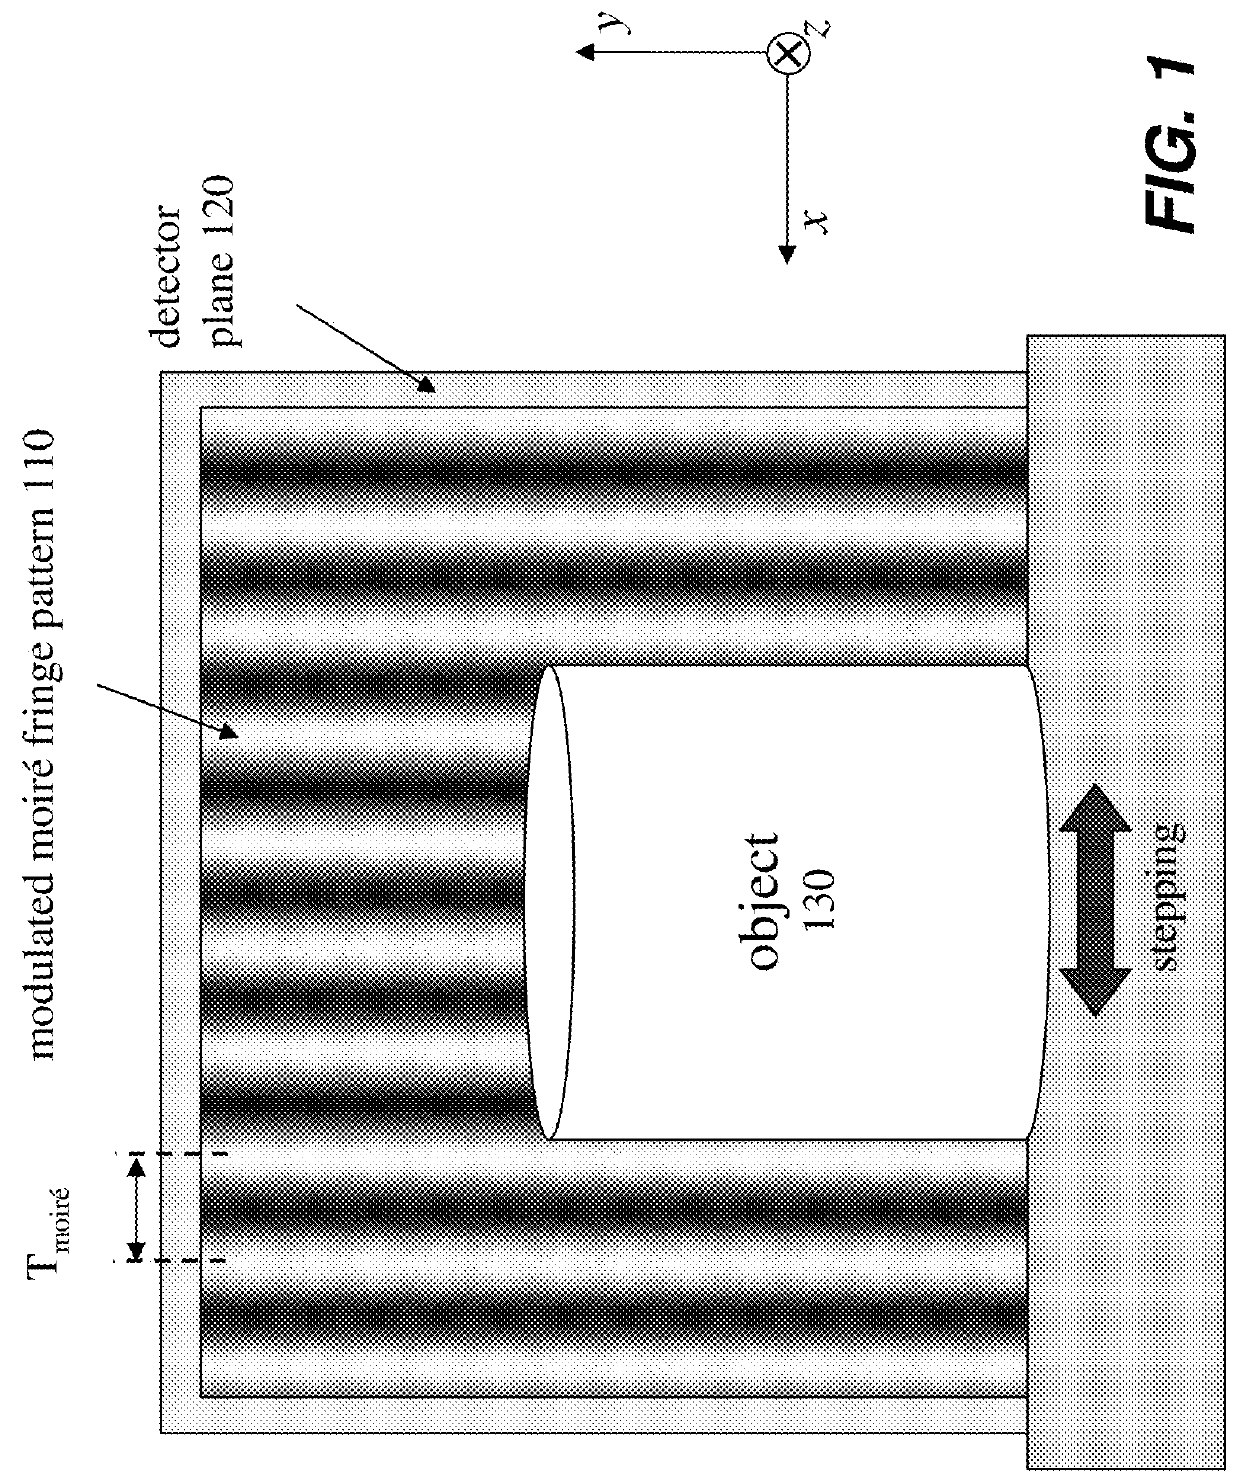 Large FOV phase contrast imaging based on detuned configuration including acquisition and reconstruction techniques